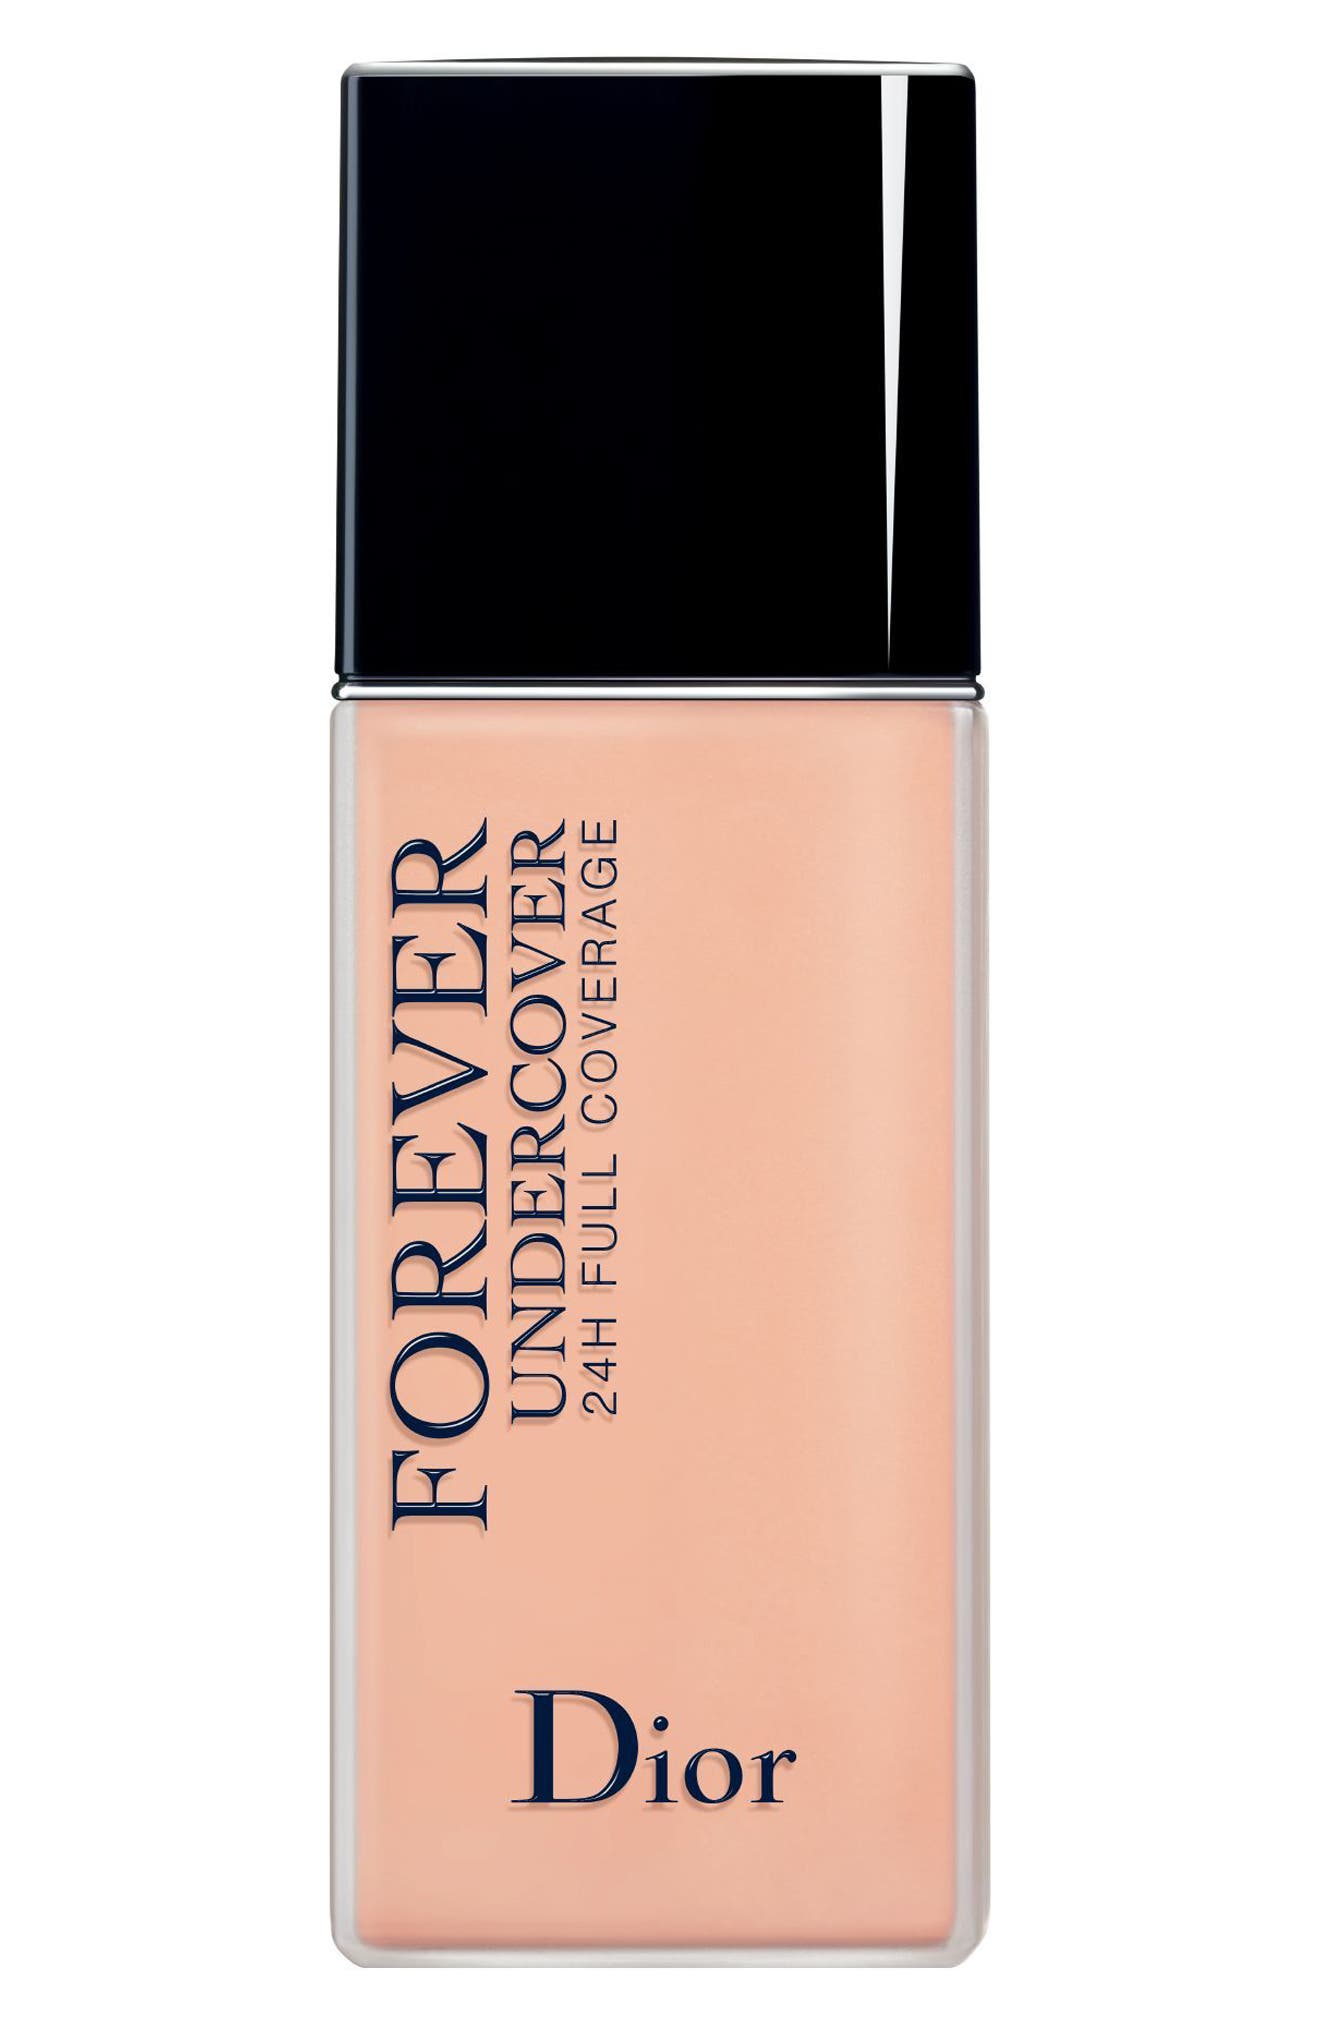 EAN 3348901383530 product image for Dior Diorskin Forever Undercover 24-Hour Full Coverage Liquid Foundation - 022 C | upcitemdb.com